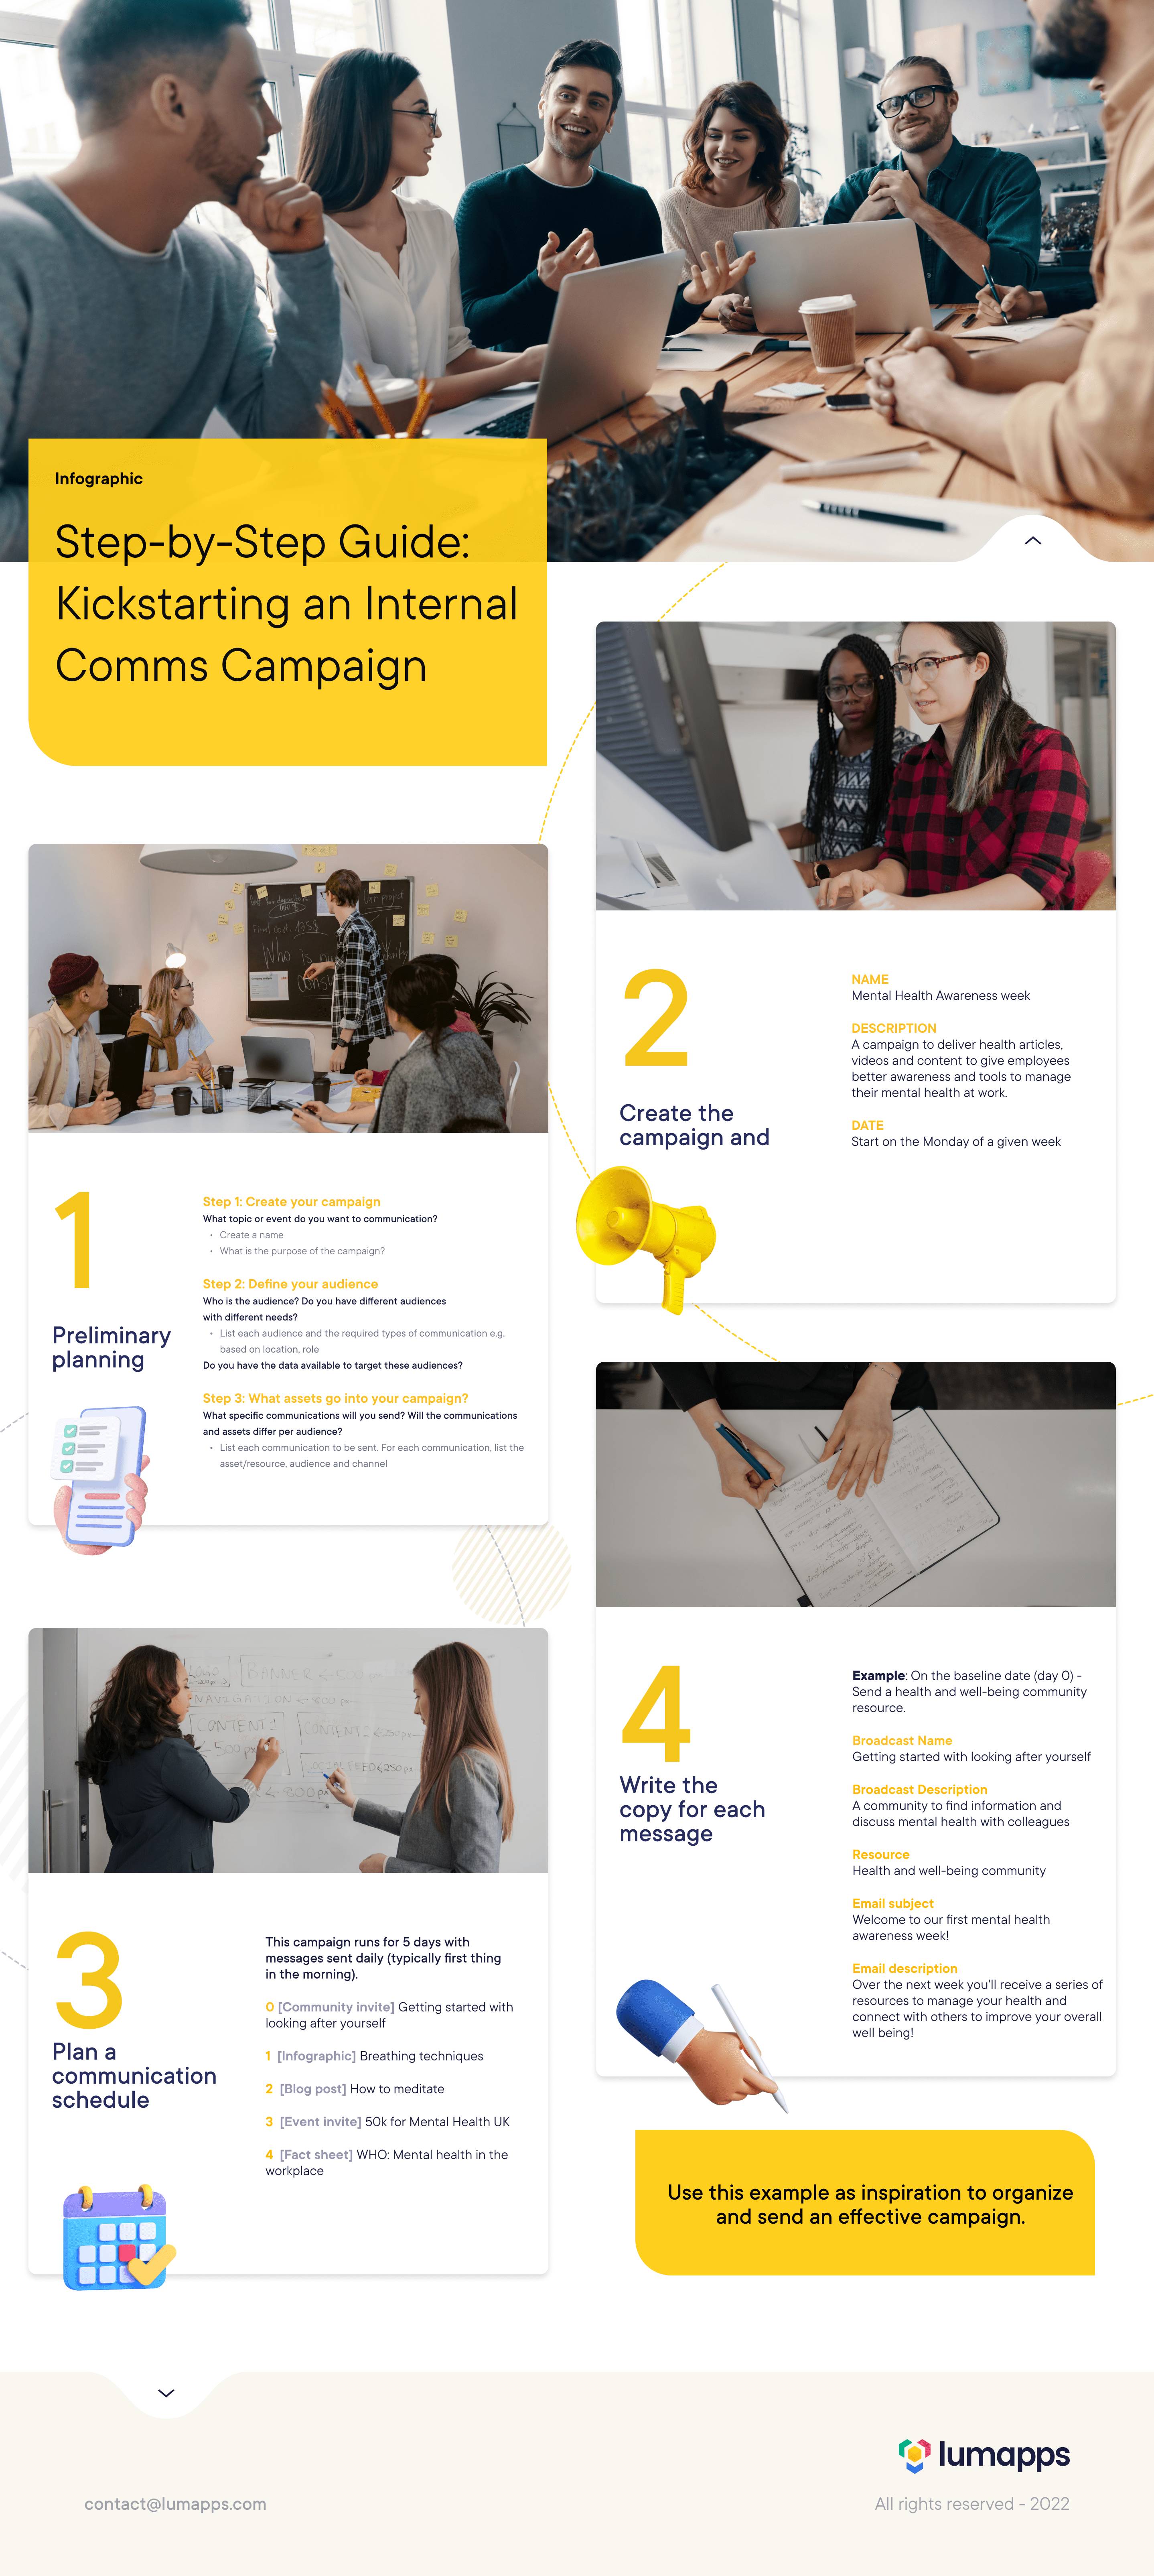 Step-by-Step Guide: Kickstarting an Internal Comms Campaign 